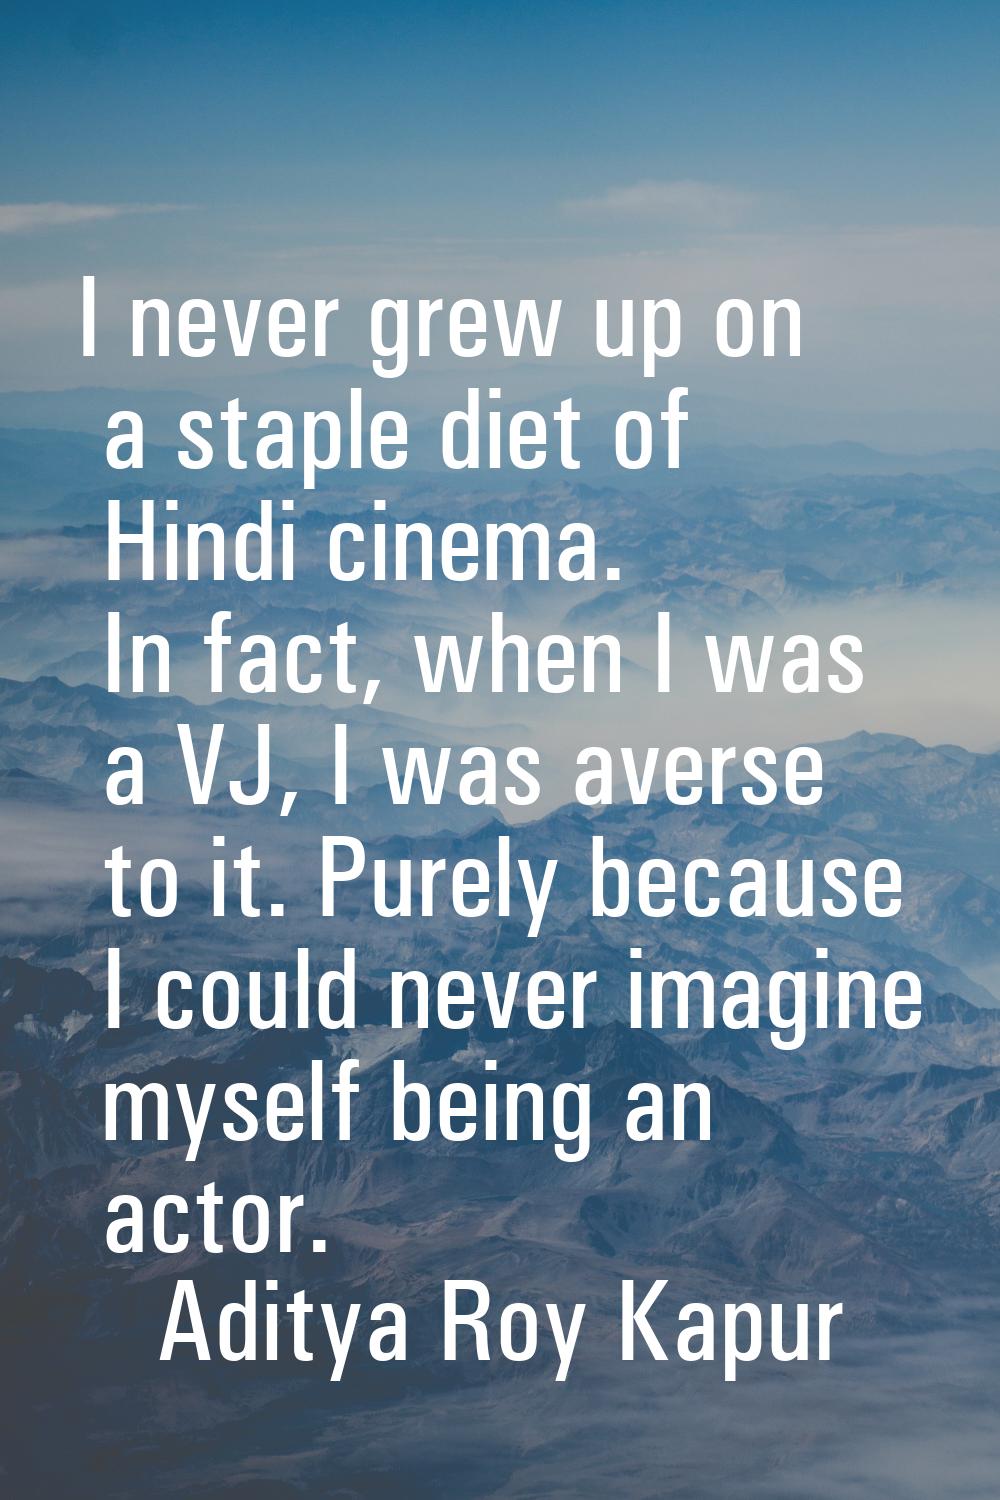 I never grew up on a staple diet of Hindi cinema. In fact, when I was a VJ, I was averse to it. Pur